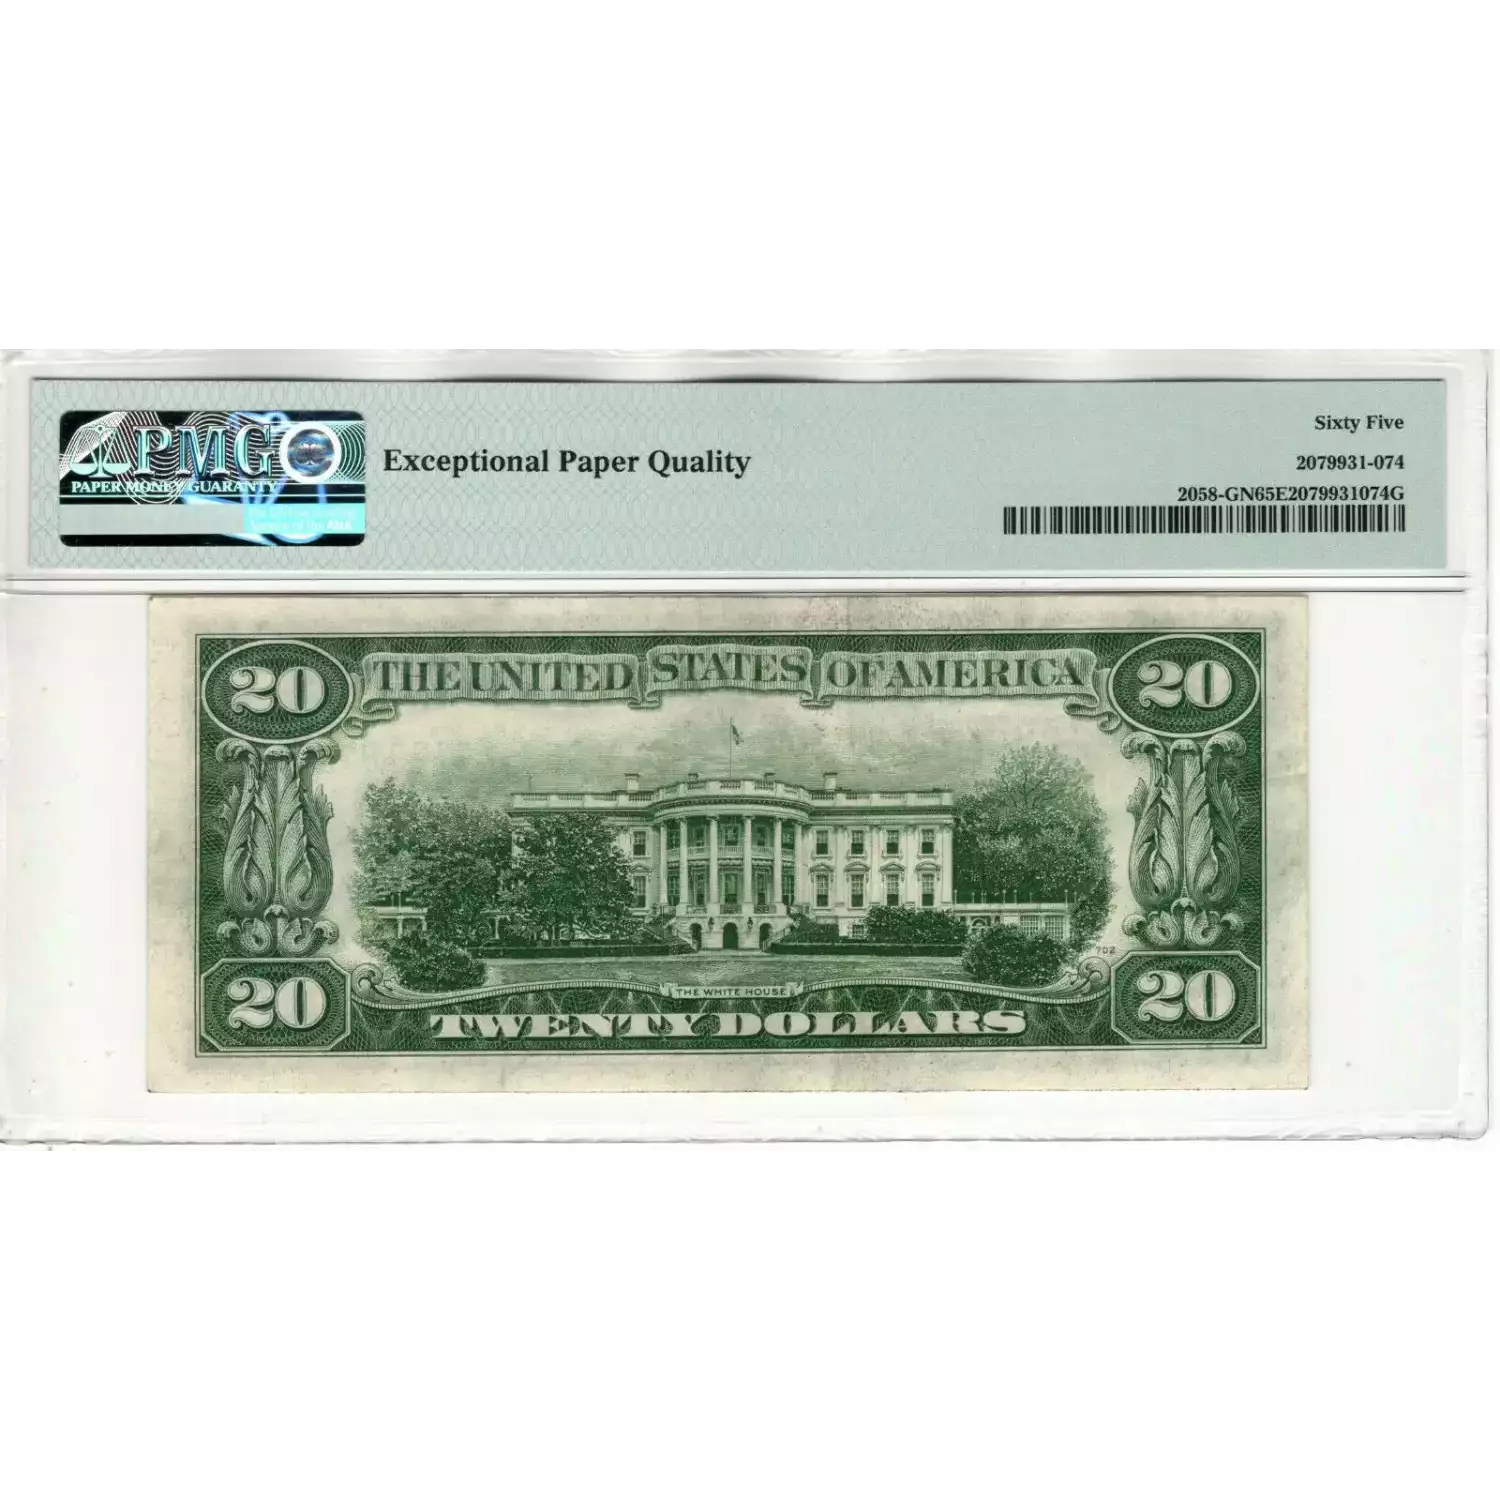 Federal Reserve Note Chicago (4)